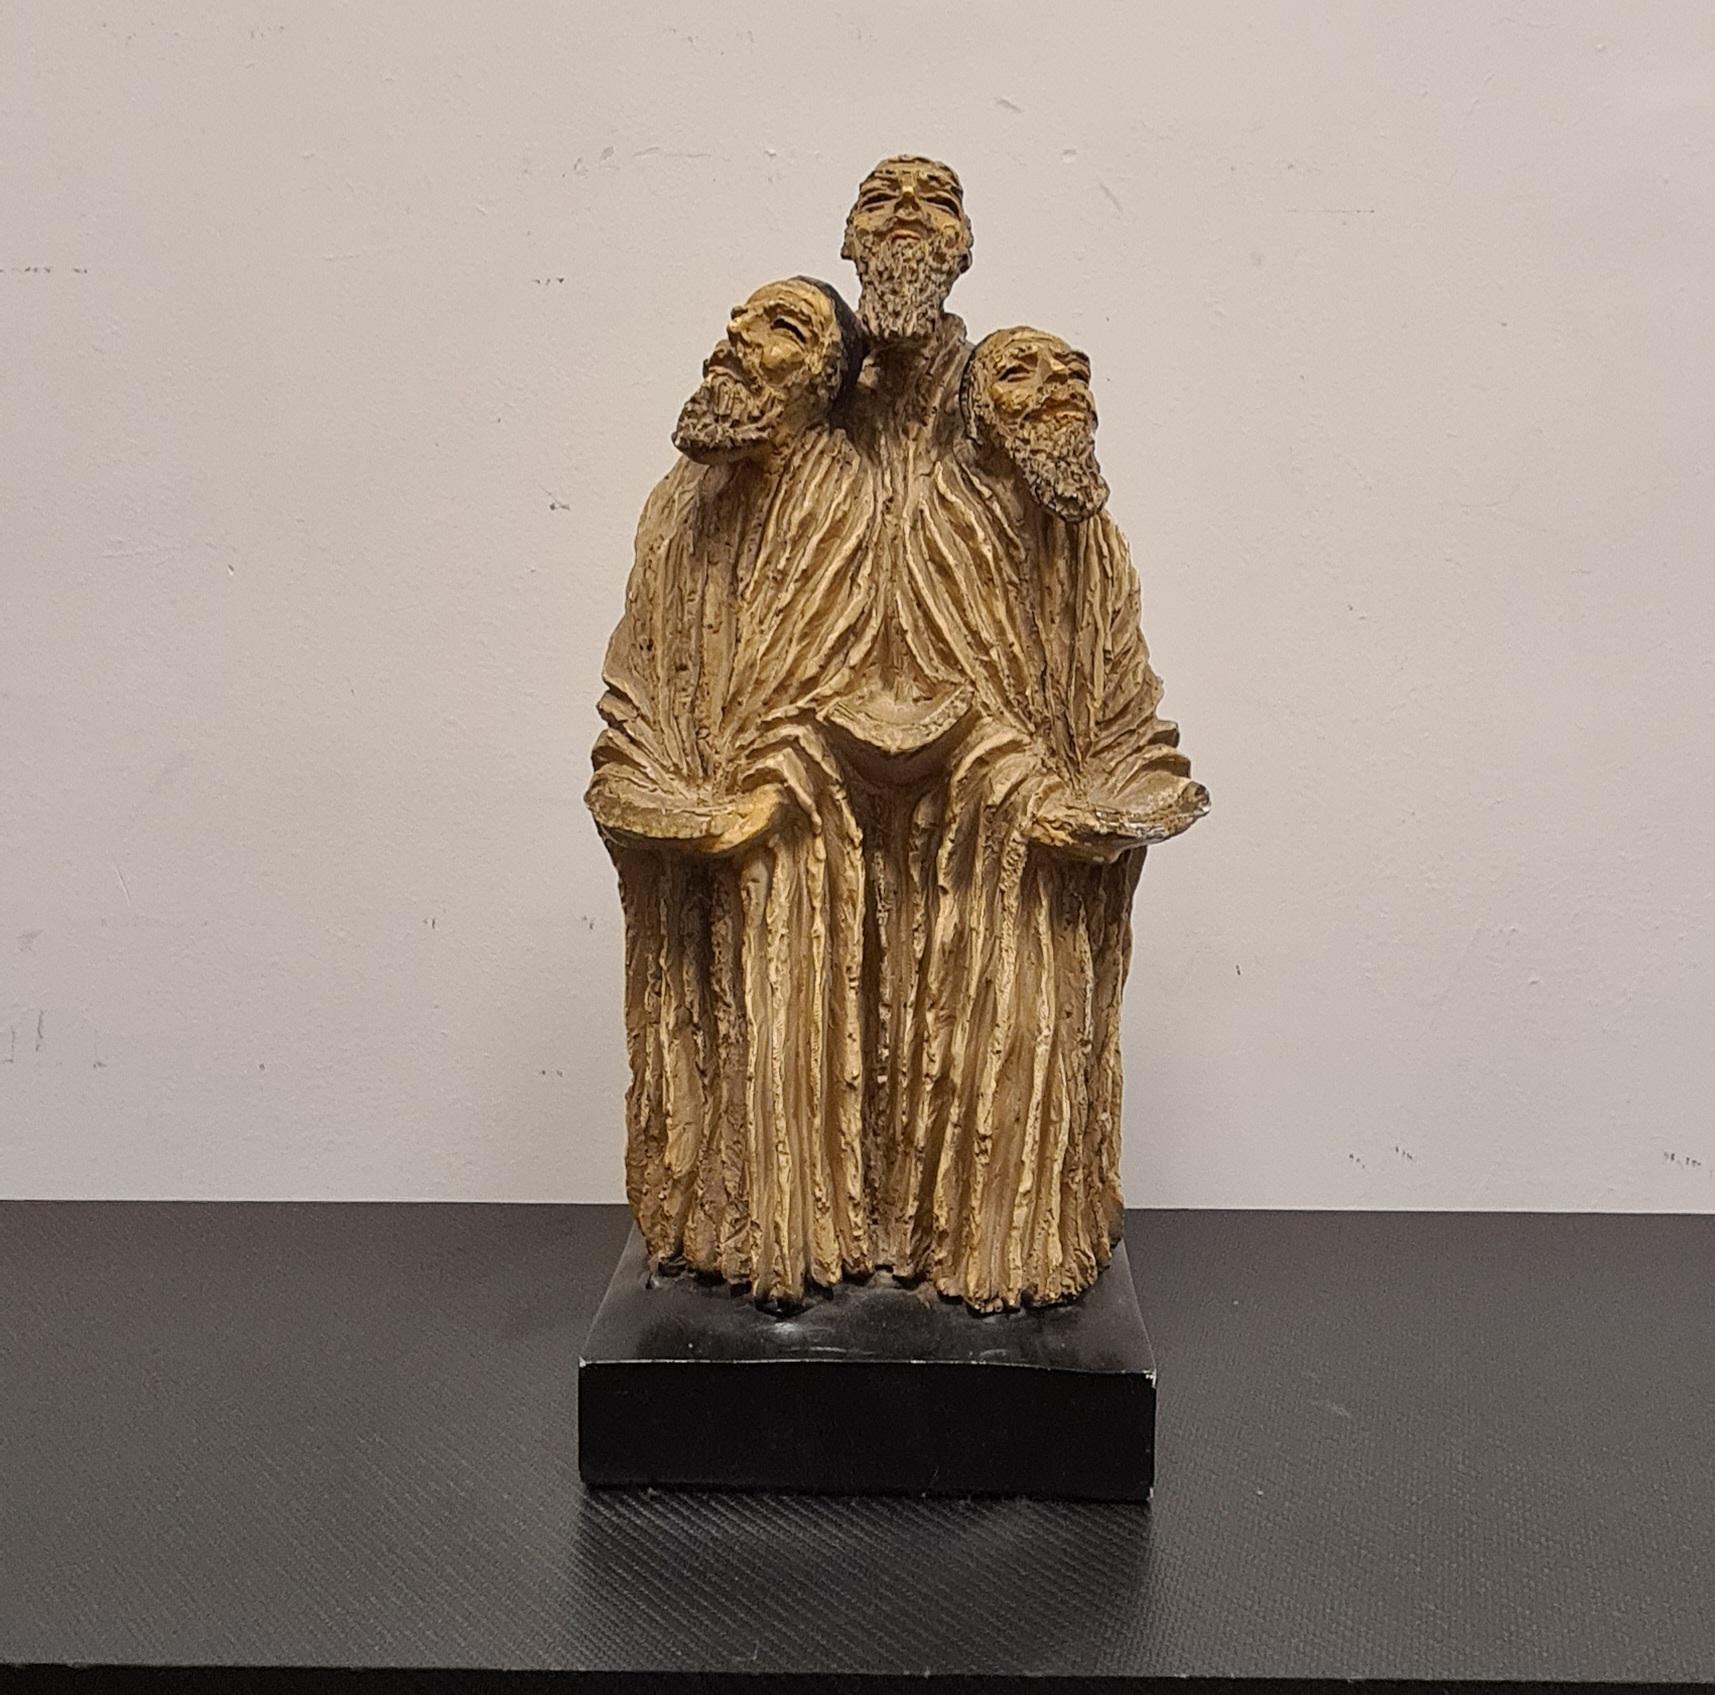 Sculpture depicting 3 singers in glazed stoneware.

Beautiful sculpture realizes in glazed stoneware with material and rustic shapes.

The sculpture depicts 3 figures in robes and kippahs, so presumably of Jewish origin , immortalized in the act of